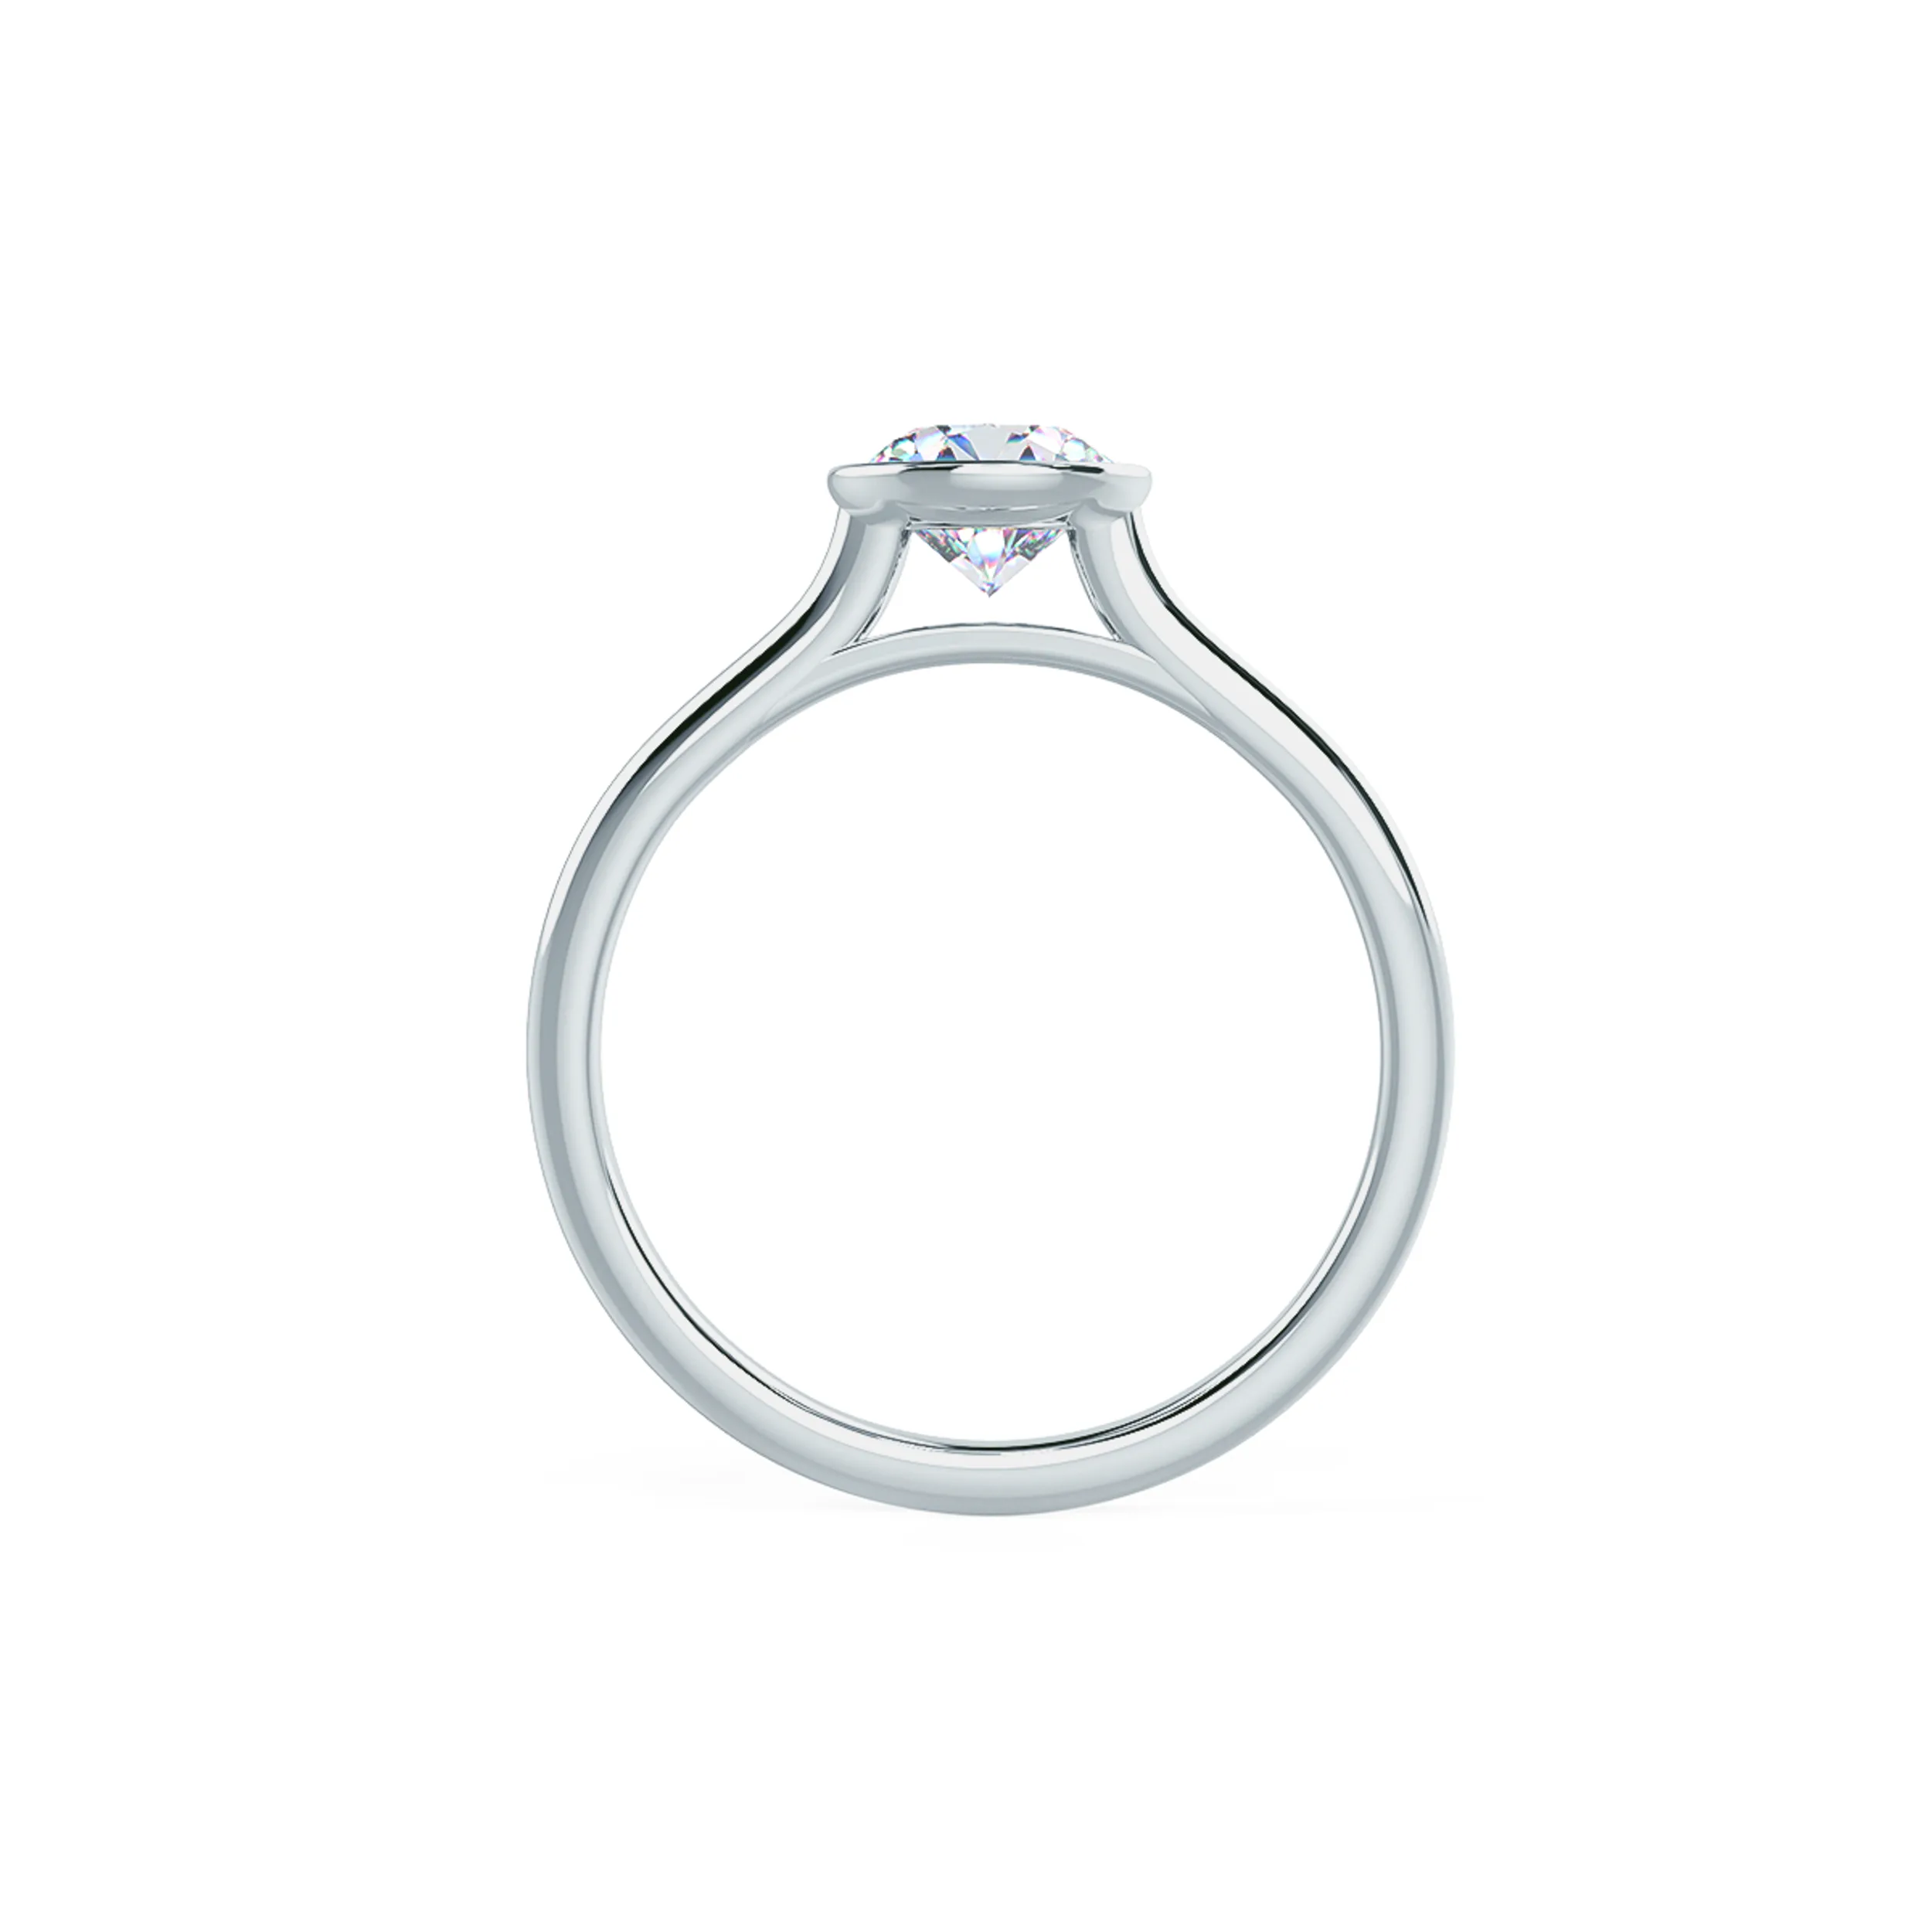 Ada Diamonds Lab Diamond Bezel Solitaire Engagement Ring Rendering In Profile View AD148